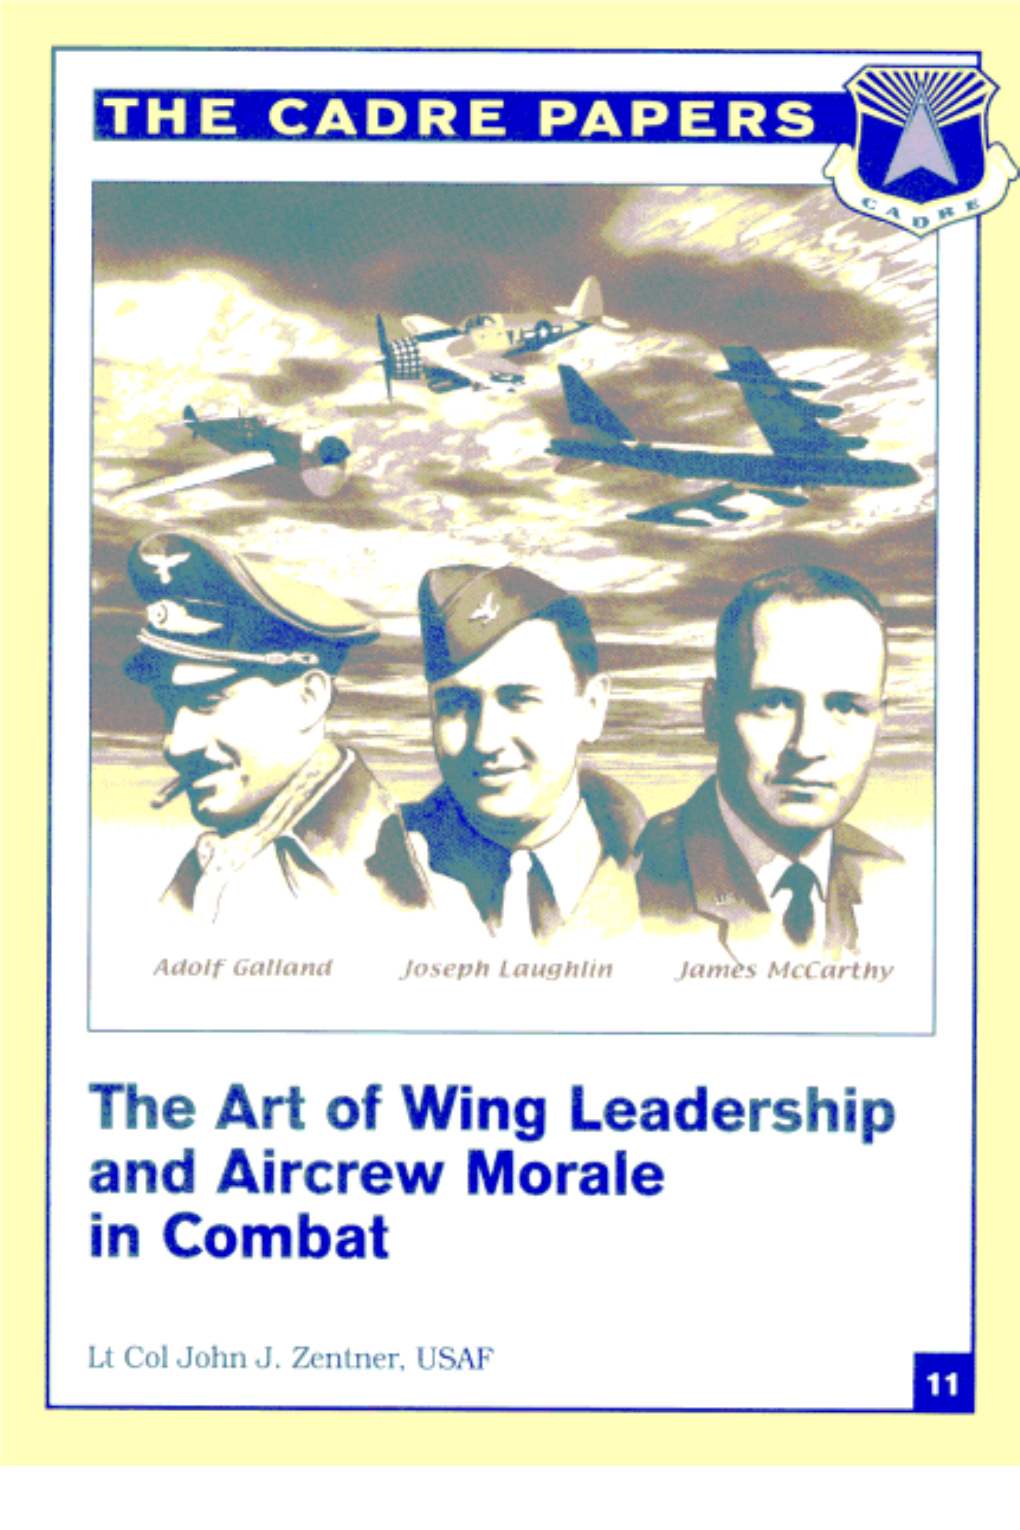 The Art of Wing Leadership and Aircrew Morale in Combat